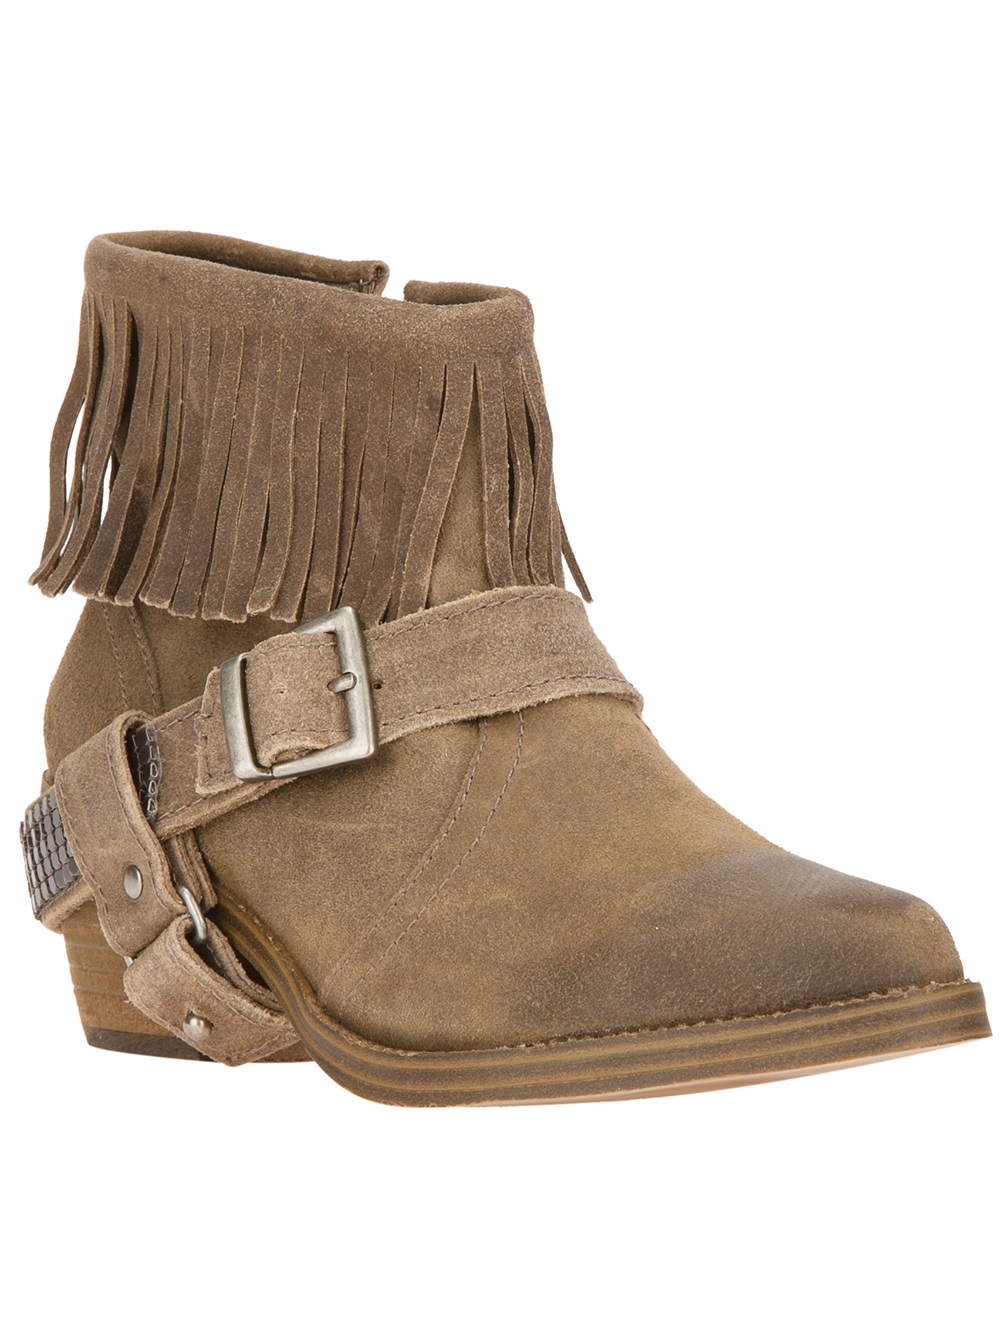 Steve Madden Fringed Western Boot in Brown | Lyst